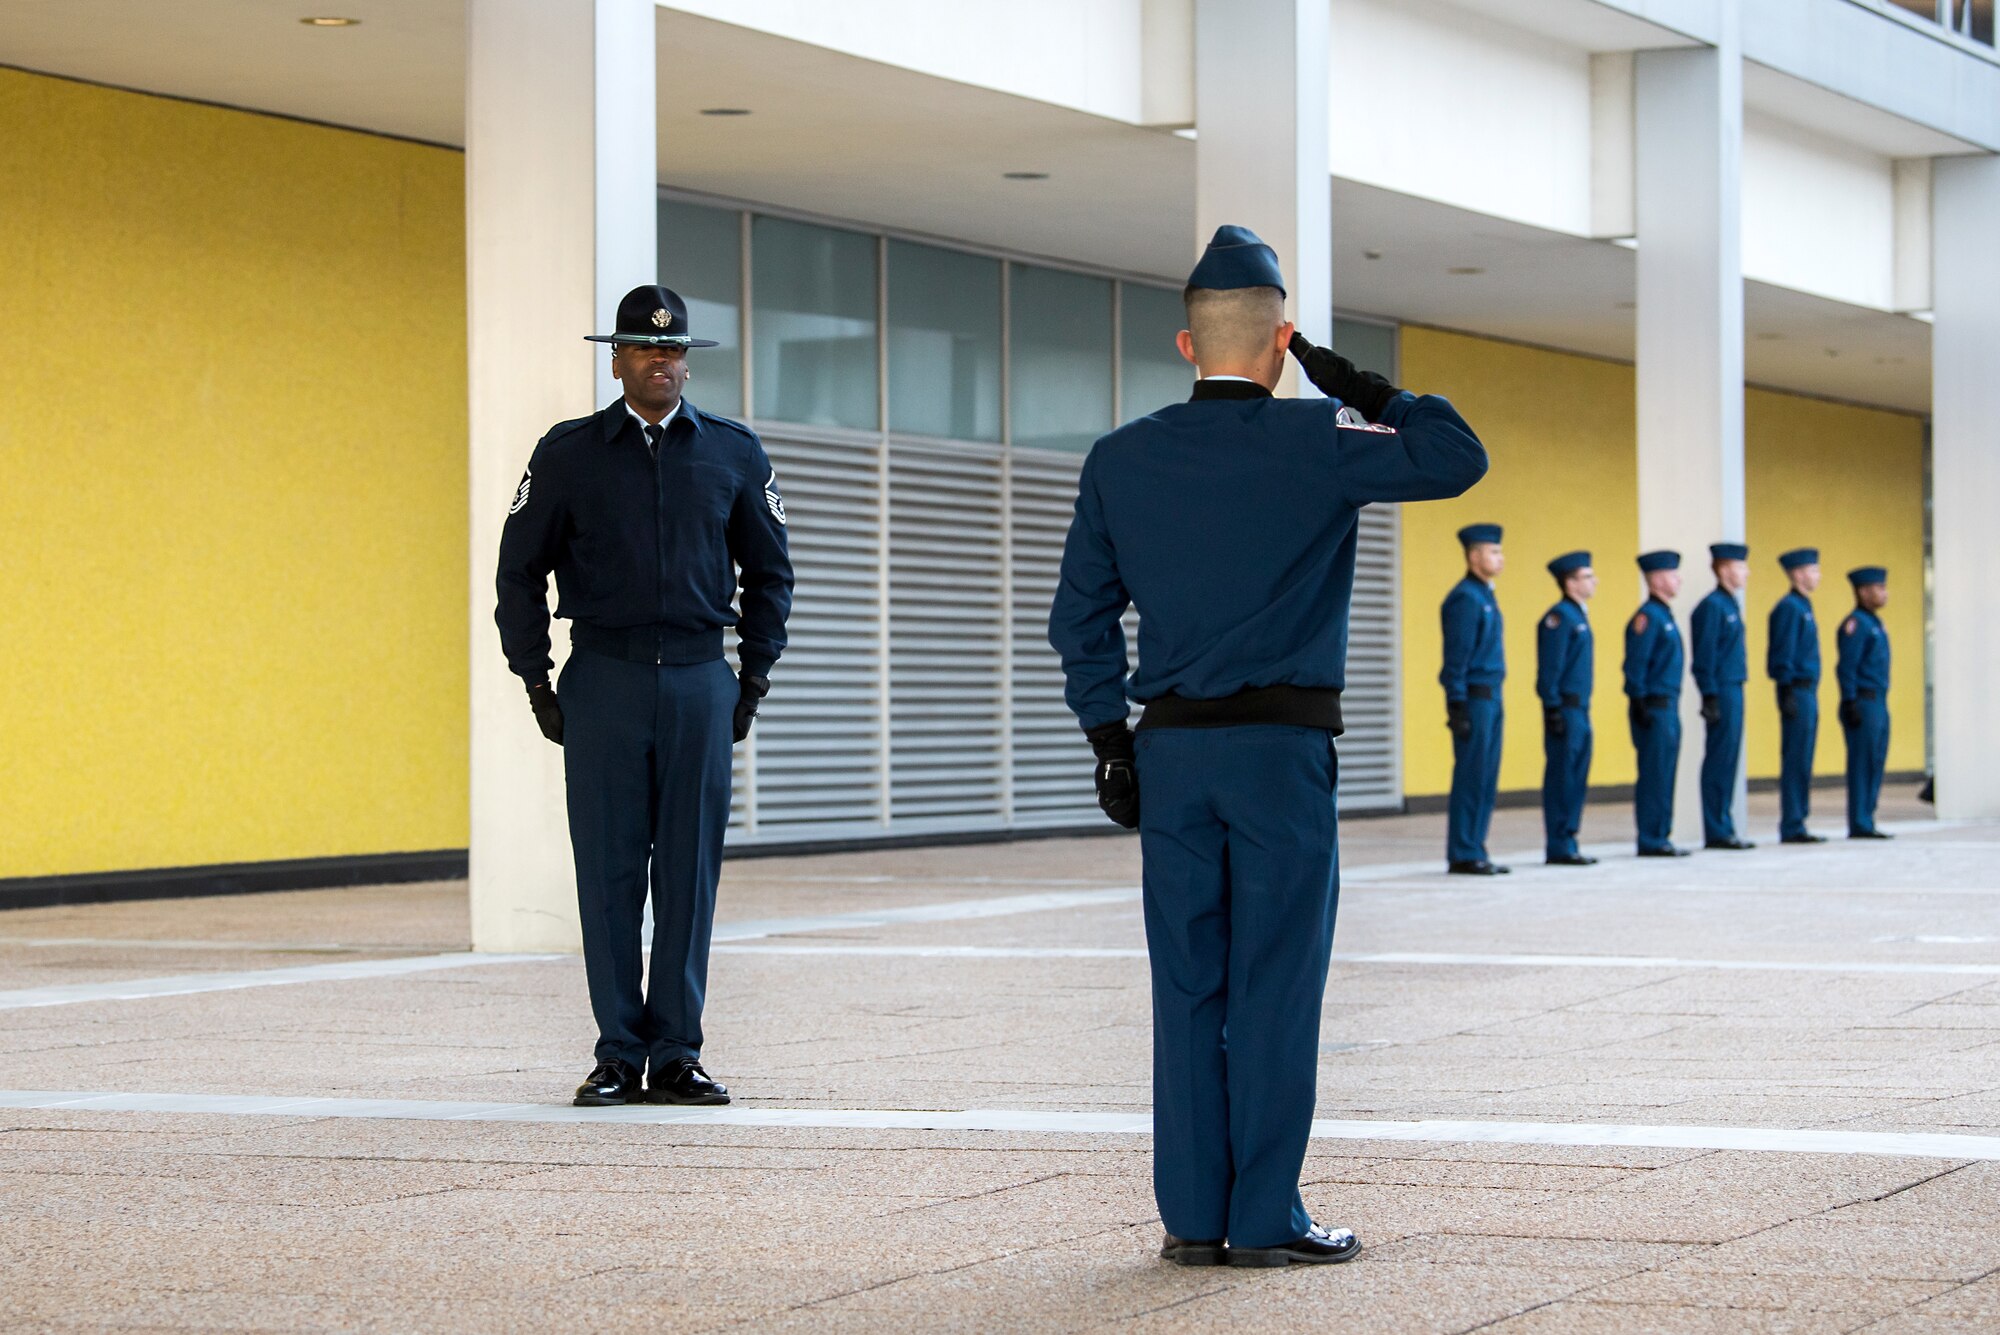 Master Sgt. Marcus Coley, a military training instructor, observes cadet training at the U.S. Air Force Academy, Jan. 29, 2020. The Academy is adding five MTIs to its Cadet Wing staff to enhance the military training program (U.S. Air Force photo/Trevor Cokley).